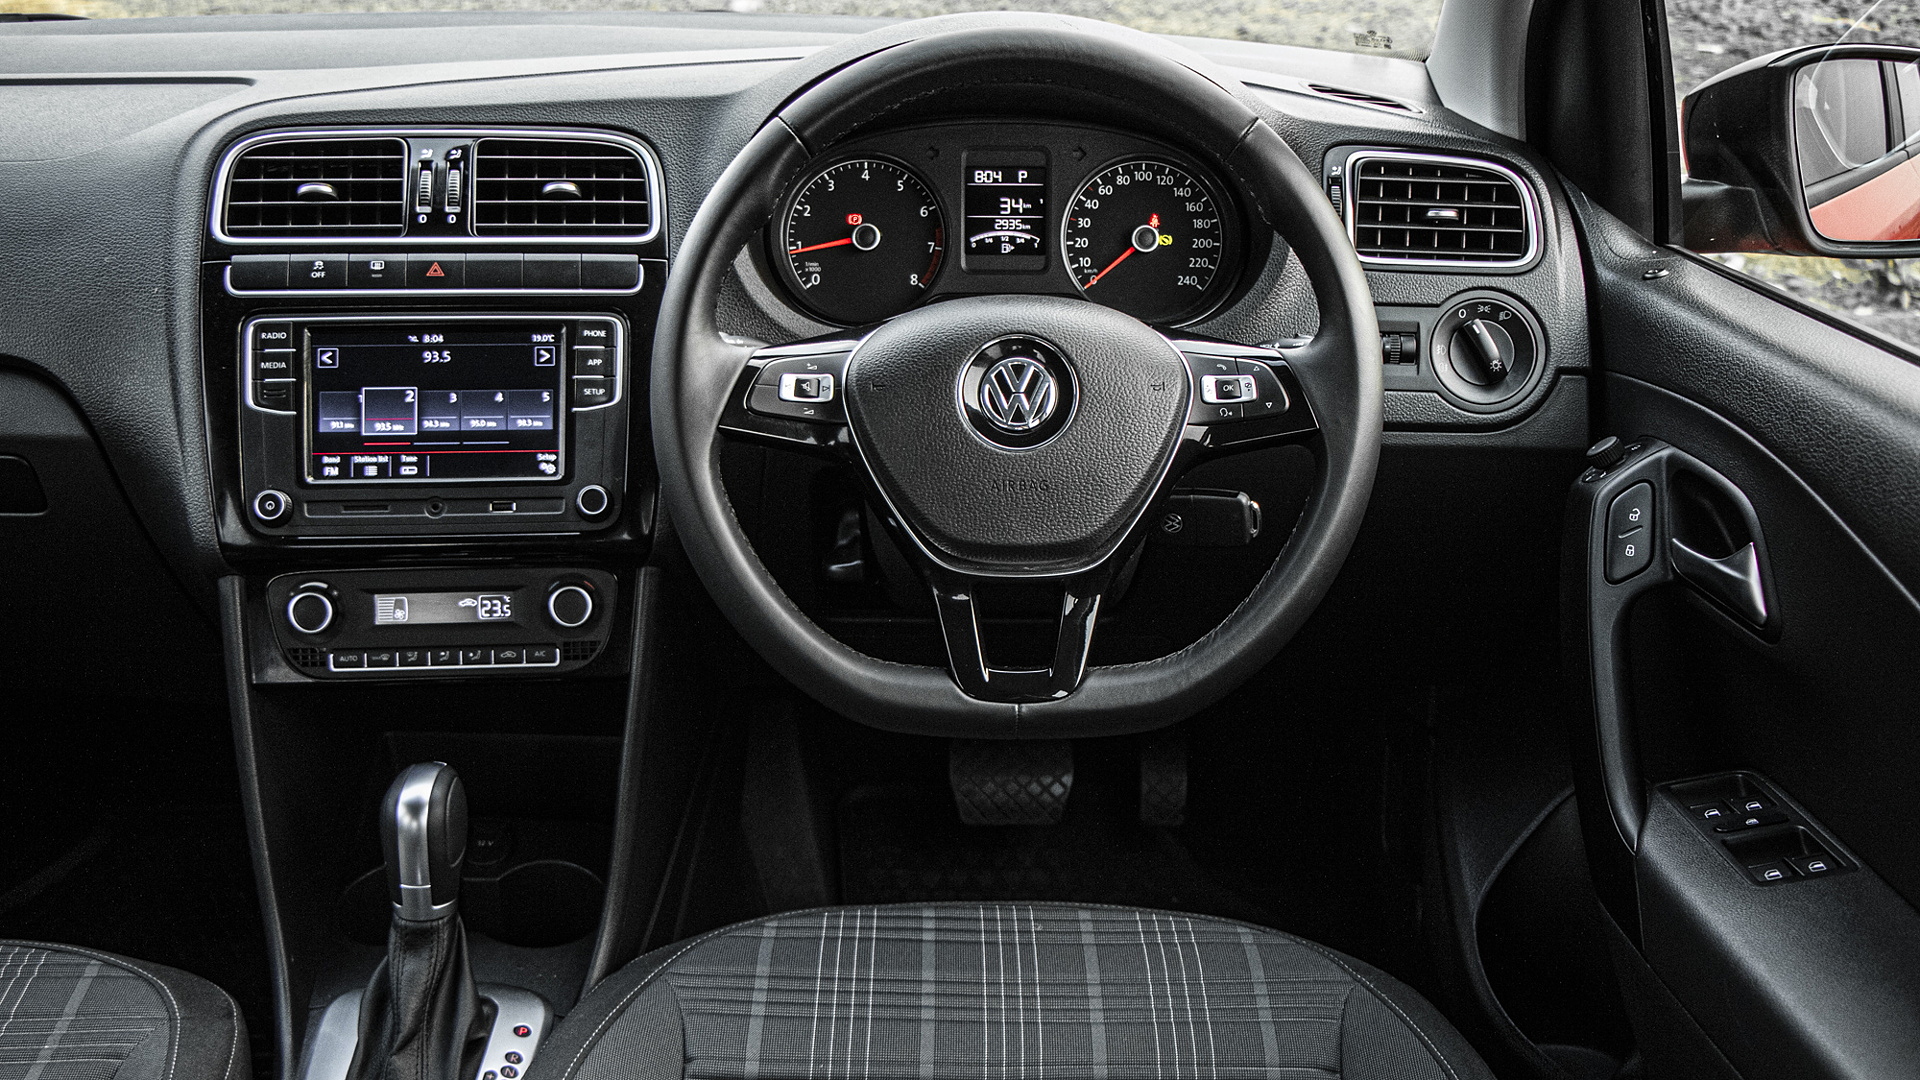 Volkswagen Polo Images - Interior &amp; Exterior Photo Gallery [300+ Images] -  CarWale